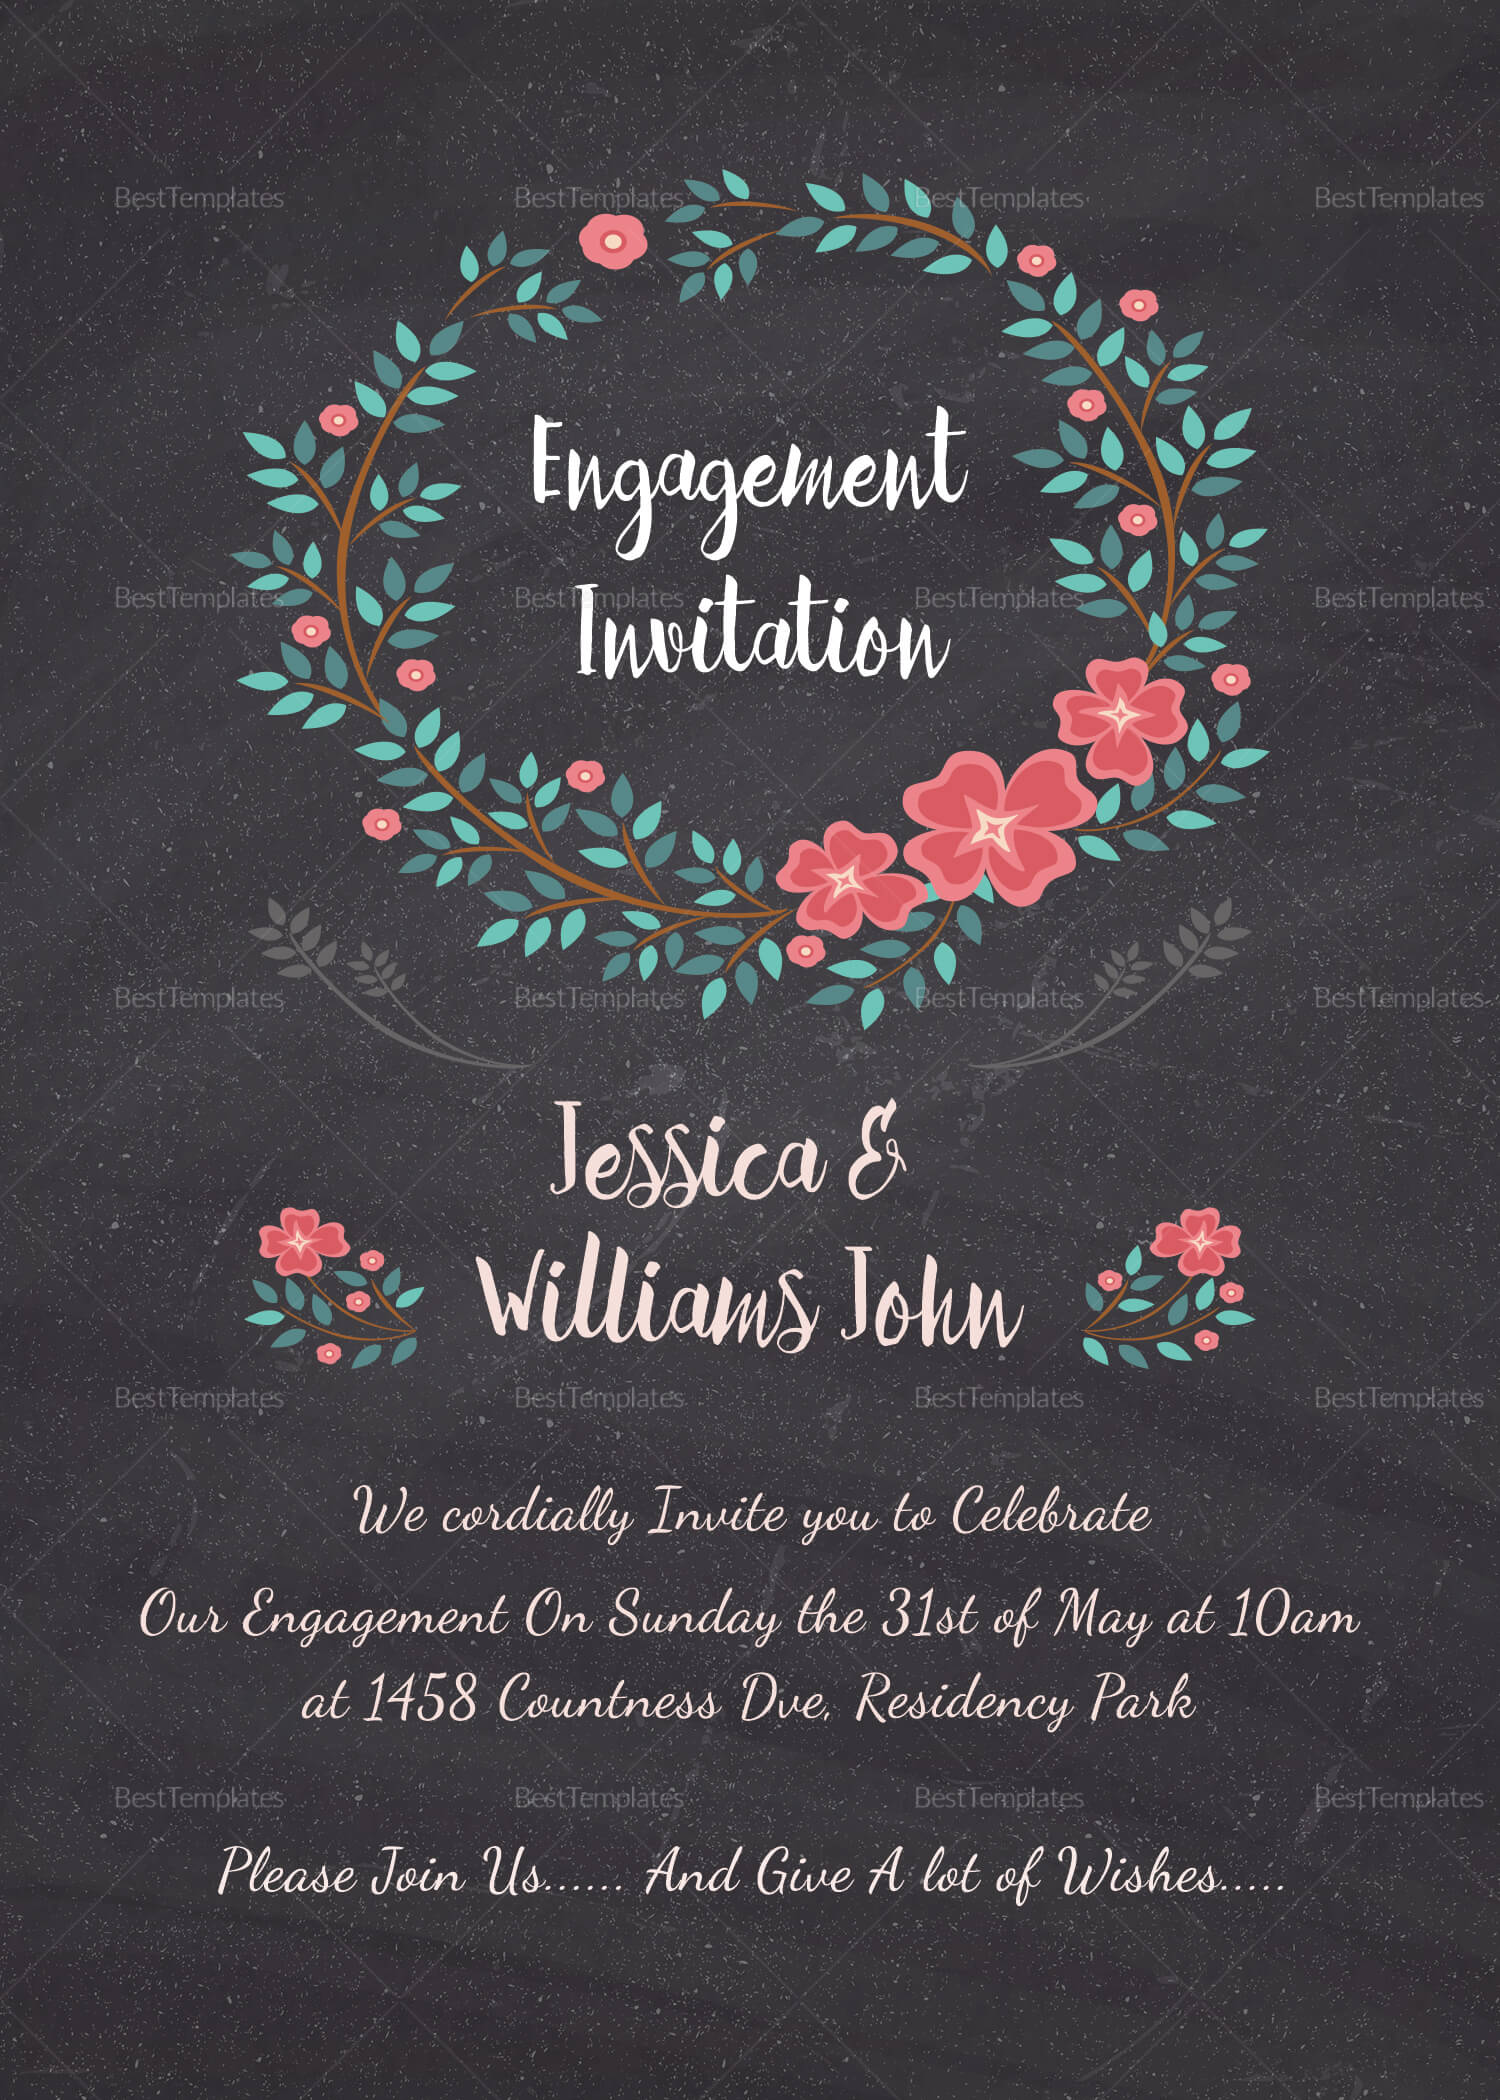 Engagement Invitation Card Template Intended For Engagement Invitation Card Template